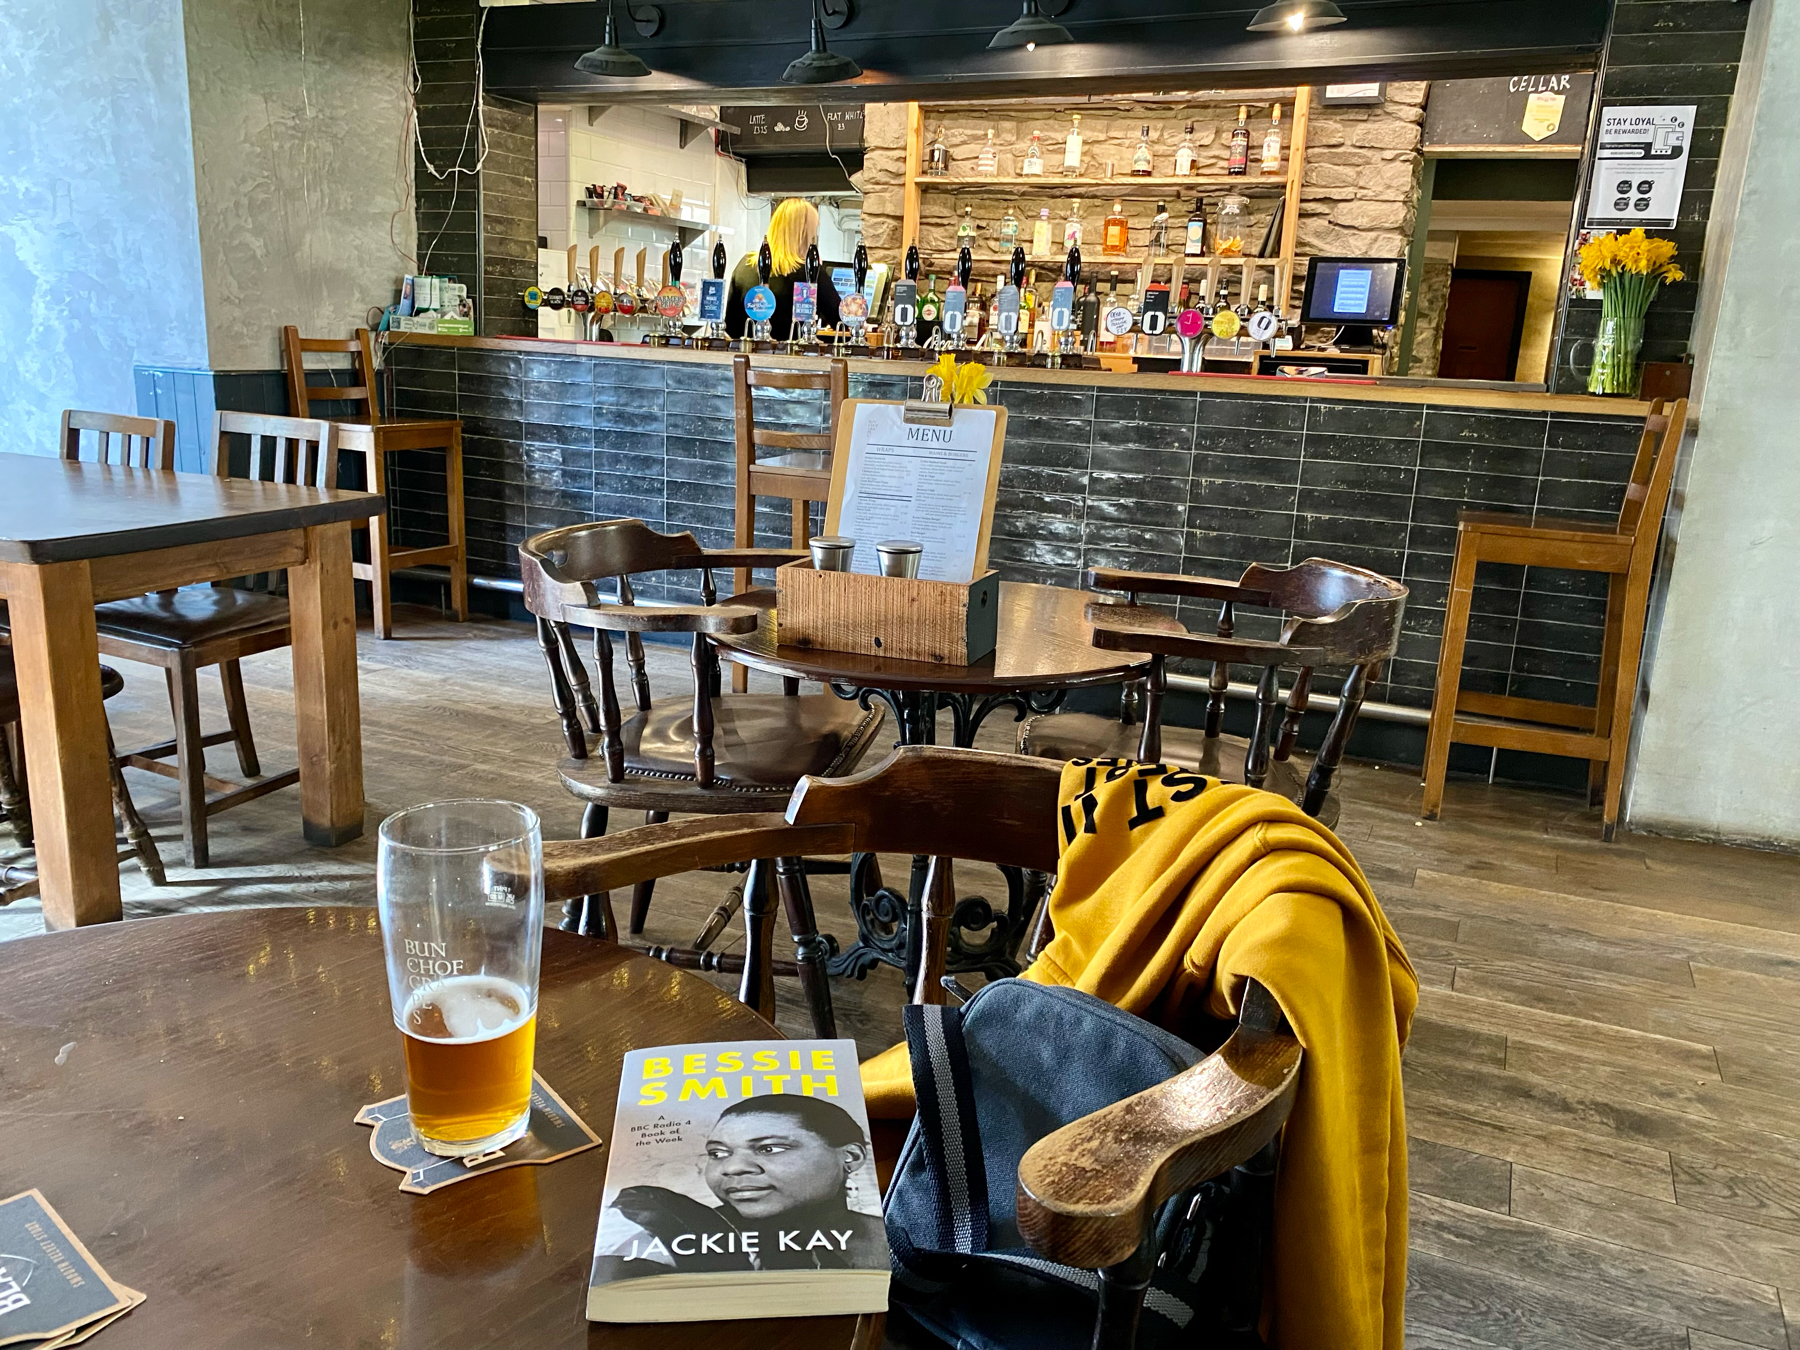 A pub interior with wooden tables and chairs, a half-full glass of beer on a table, and a book titled Bessie Smith by Jackie Kay. A bar with taps and bottles in the background, and a coat draped over a chair.